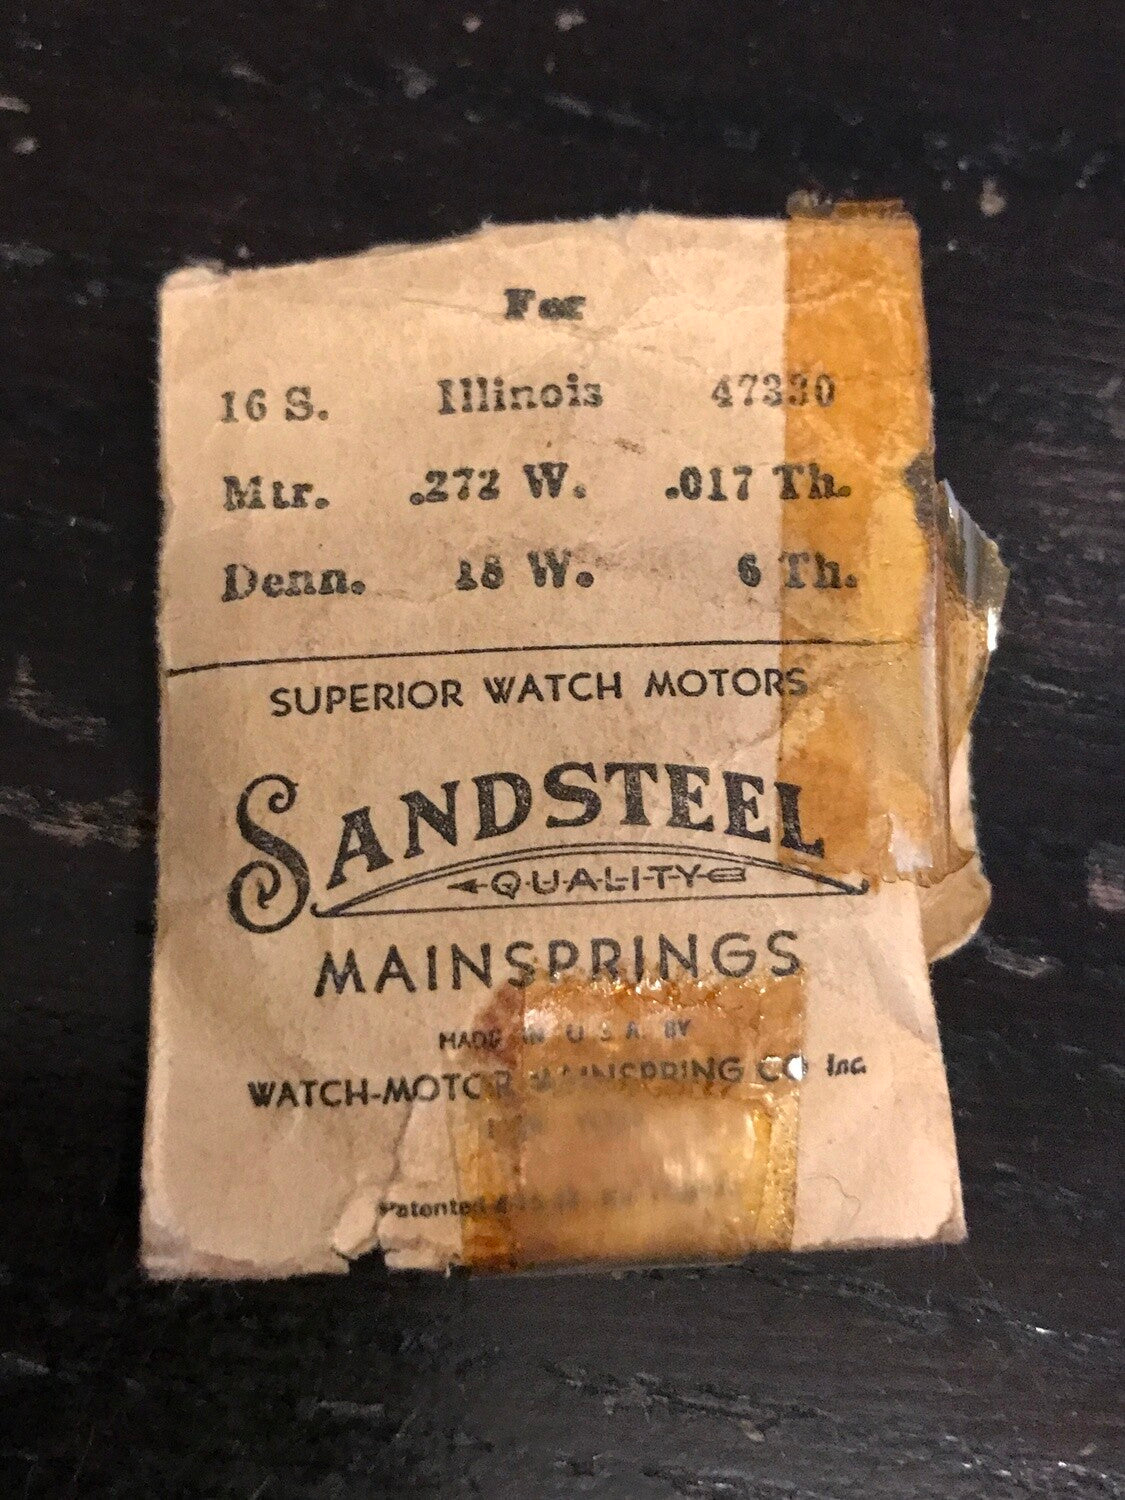 Sandsteel Mainspring for Illinois 16s Factory No. 47330 - Steel